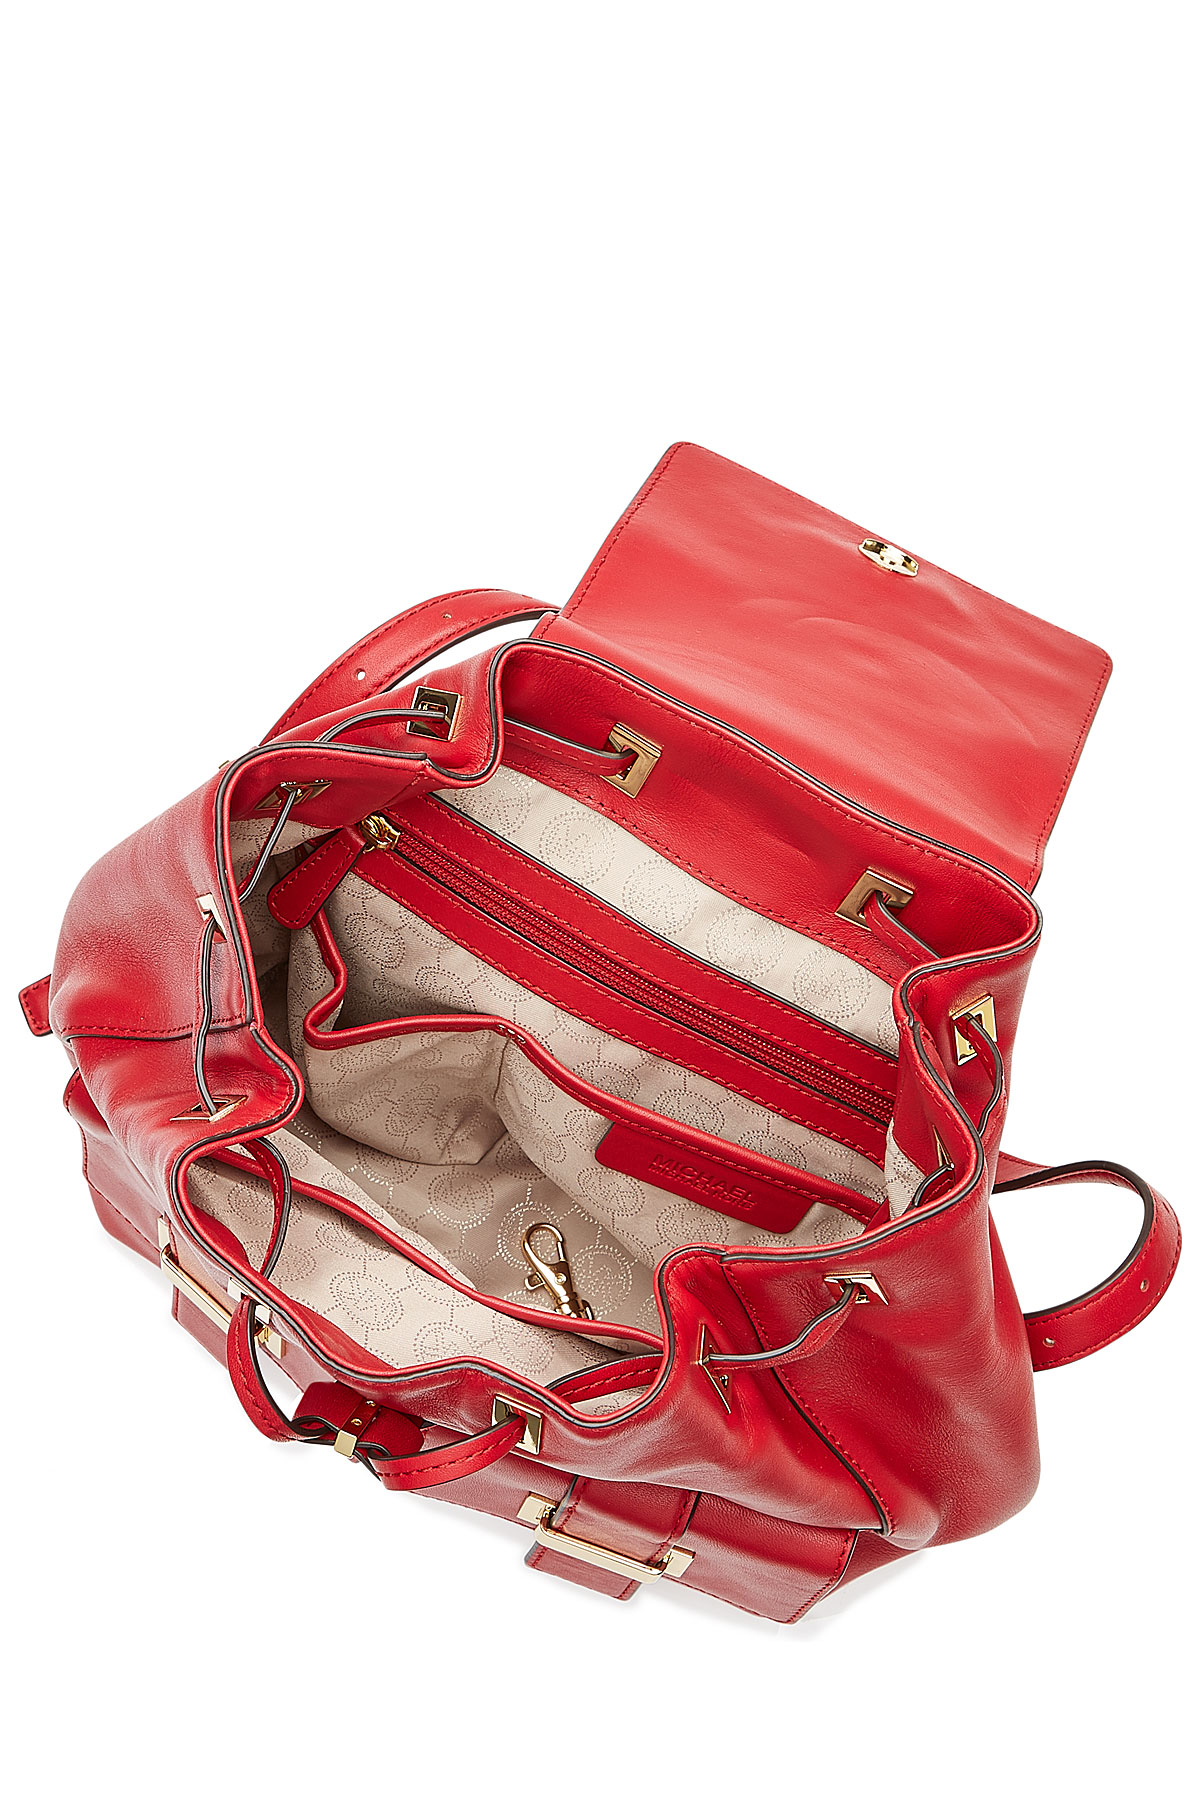 MICHAEL Michael Kors Leather Marly Backpack - Red in Red - Lyst